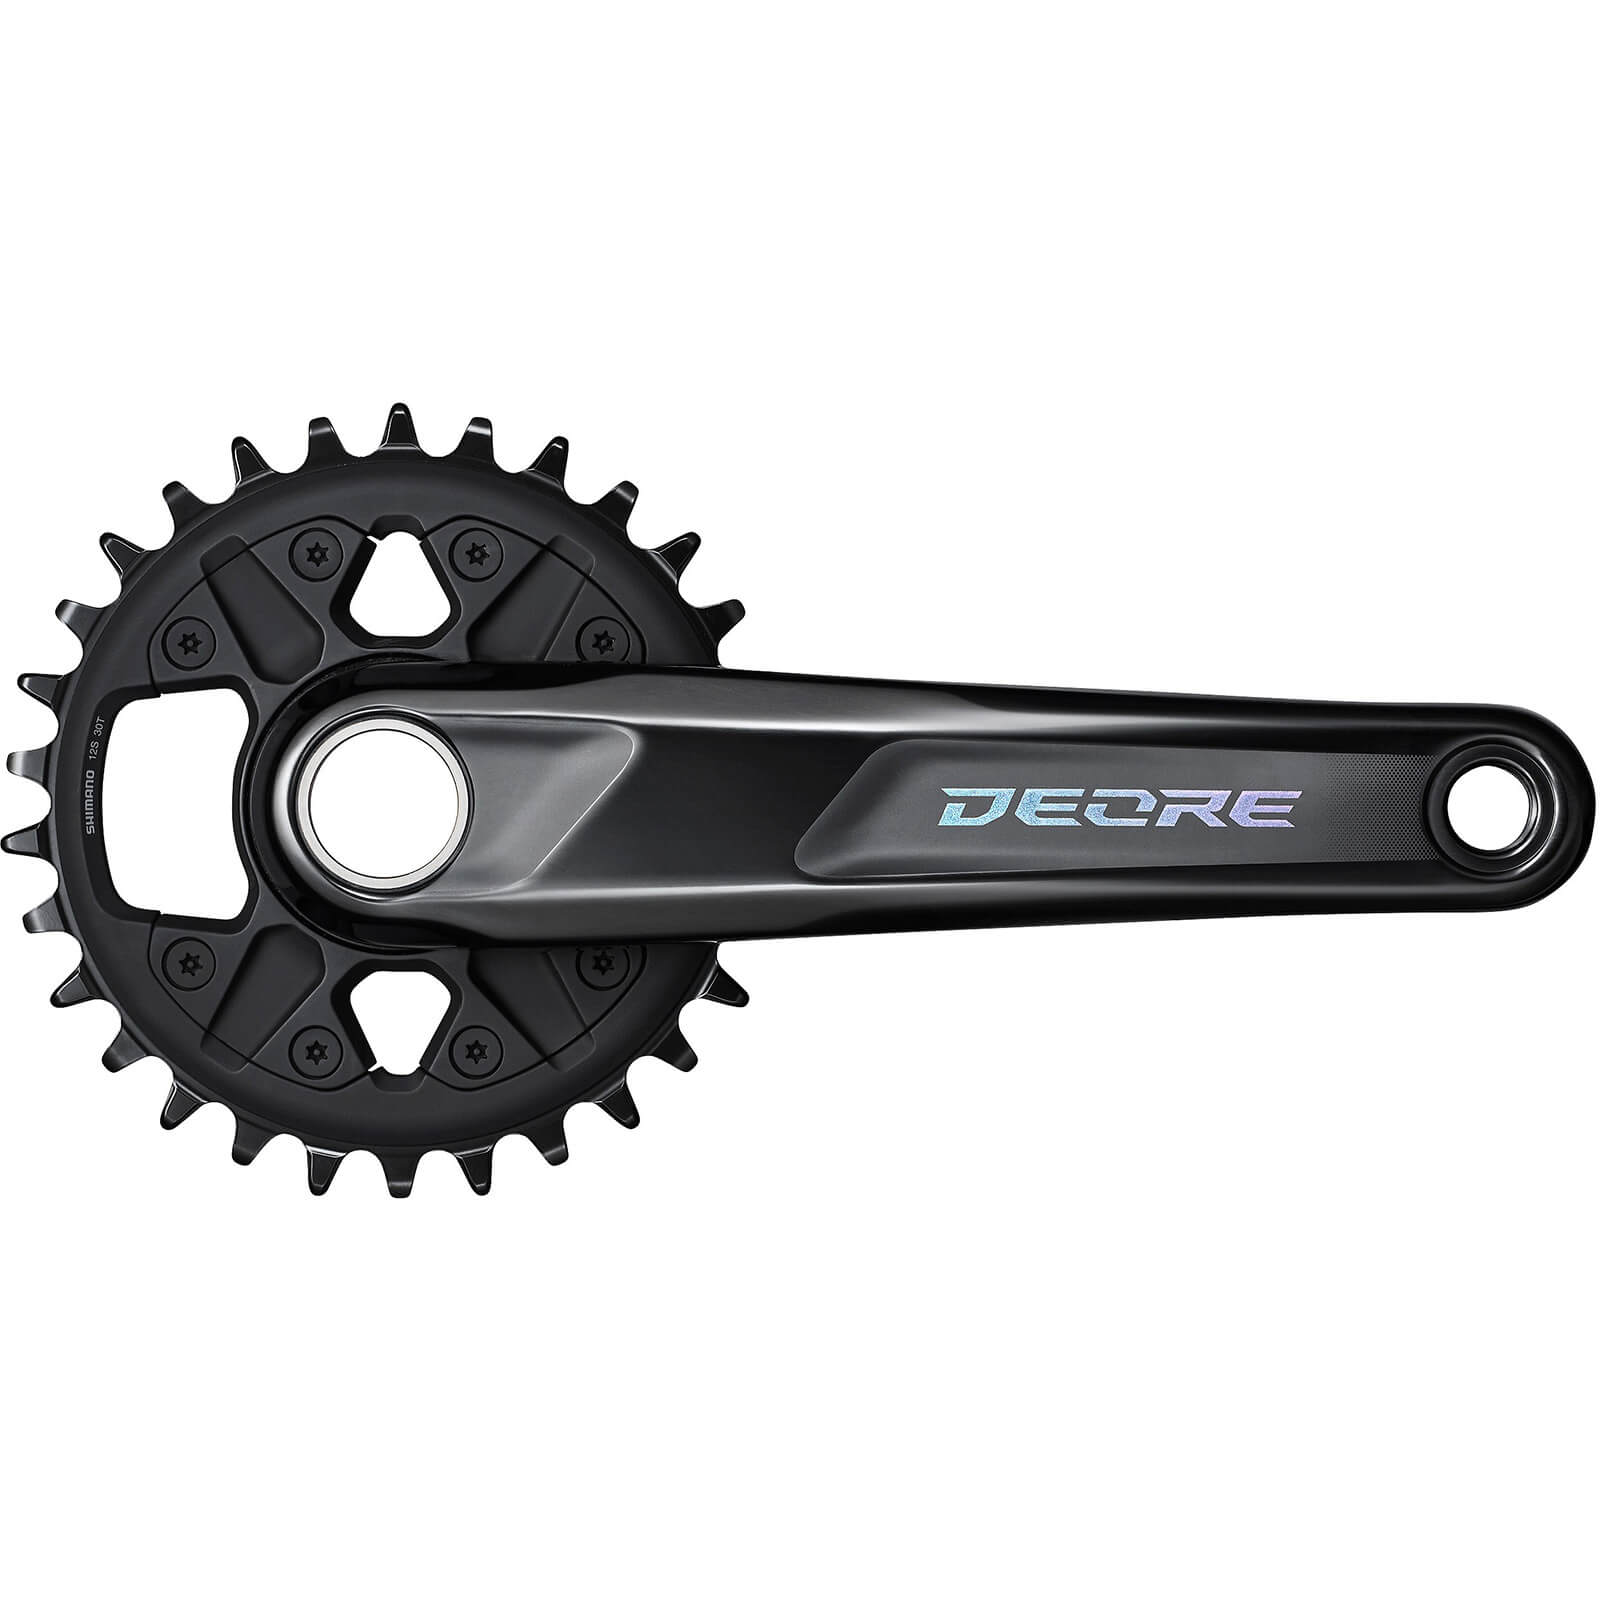 Shimano Deore M6100 Chainset - 30T - 170mm